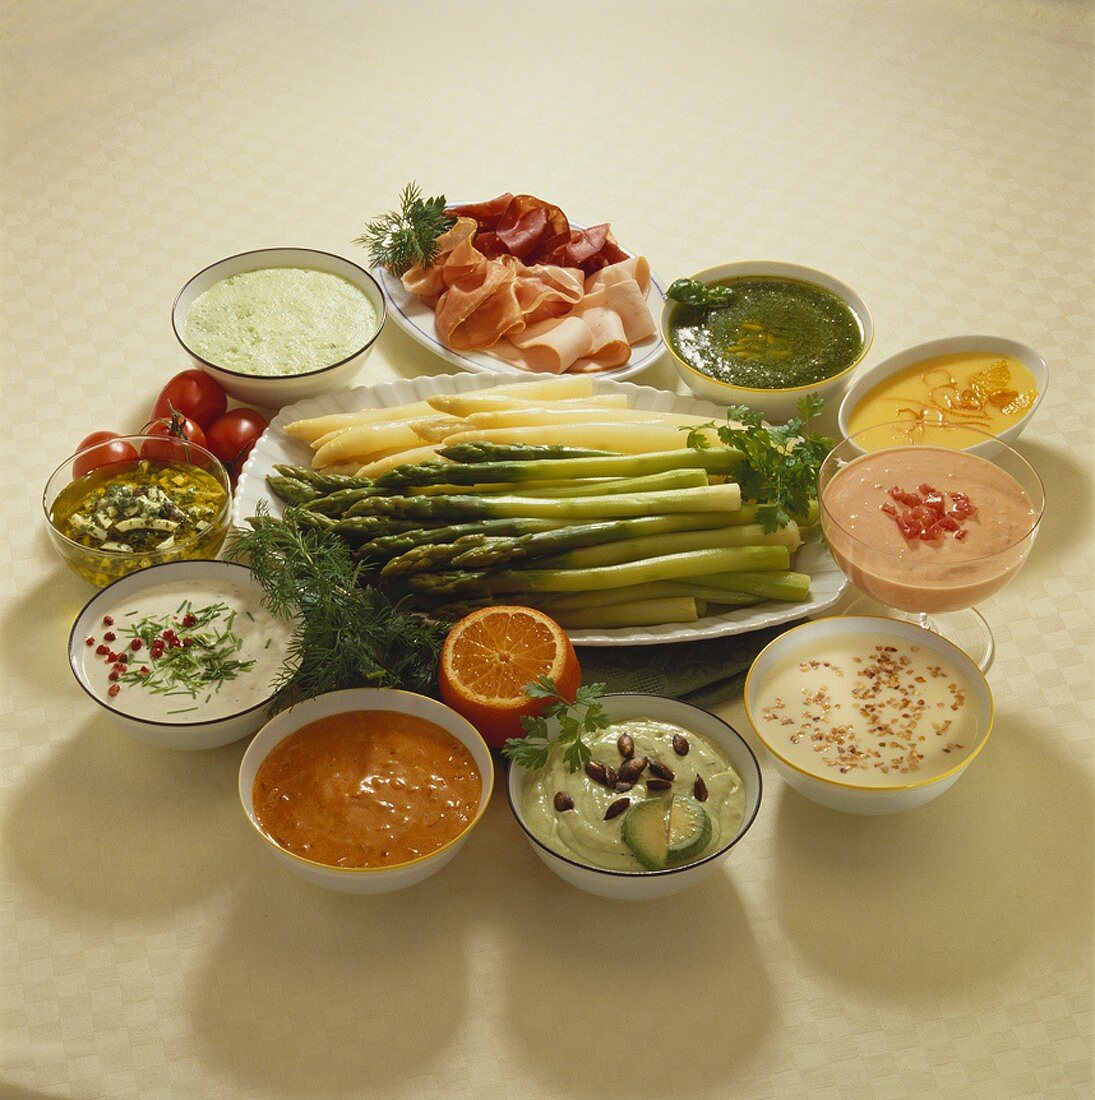 Green and white asparagus with several sauces